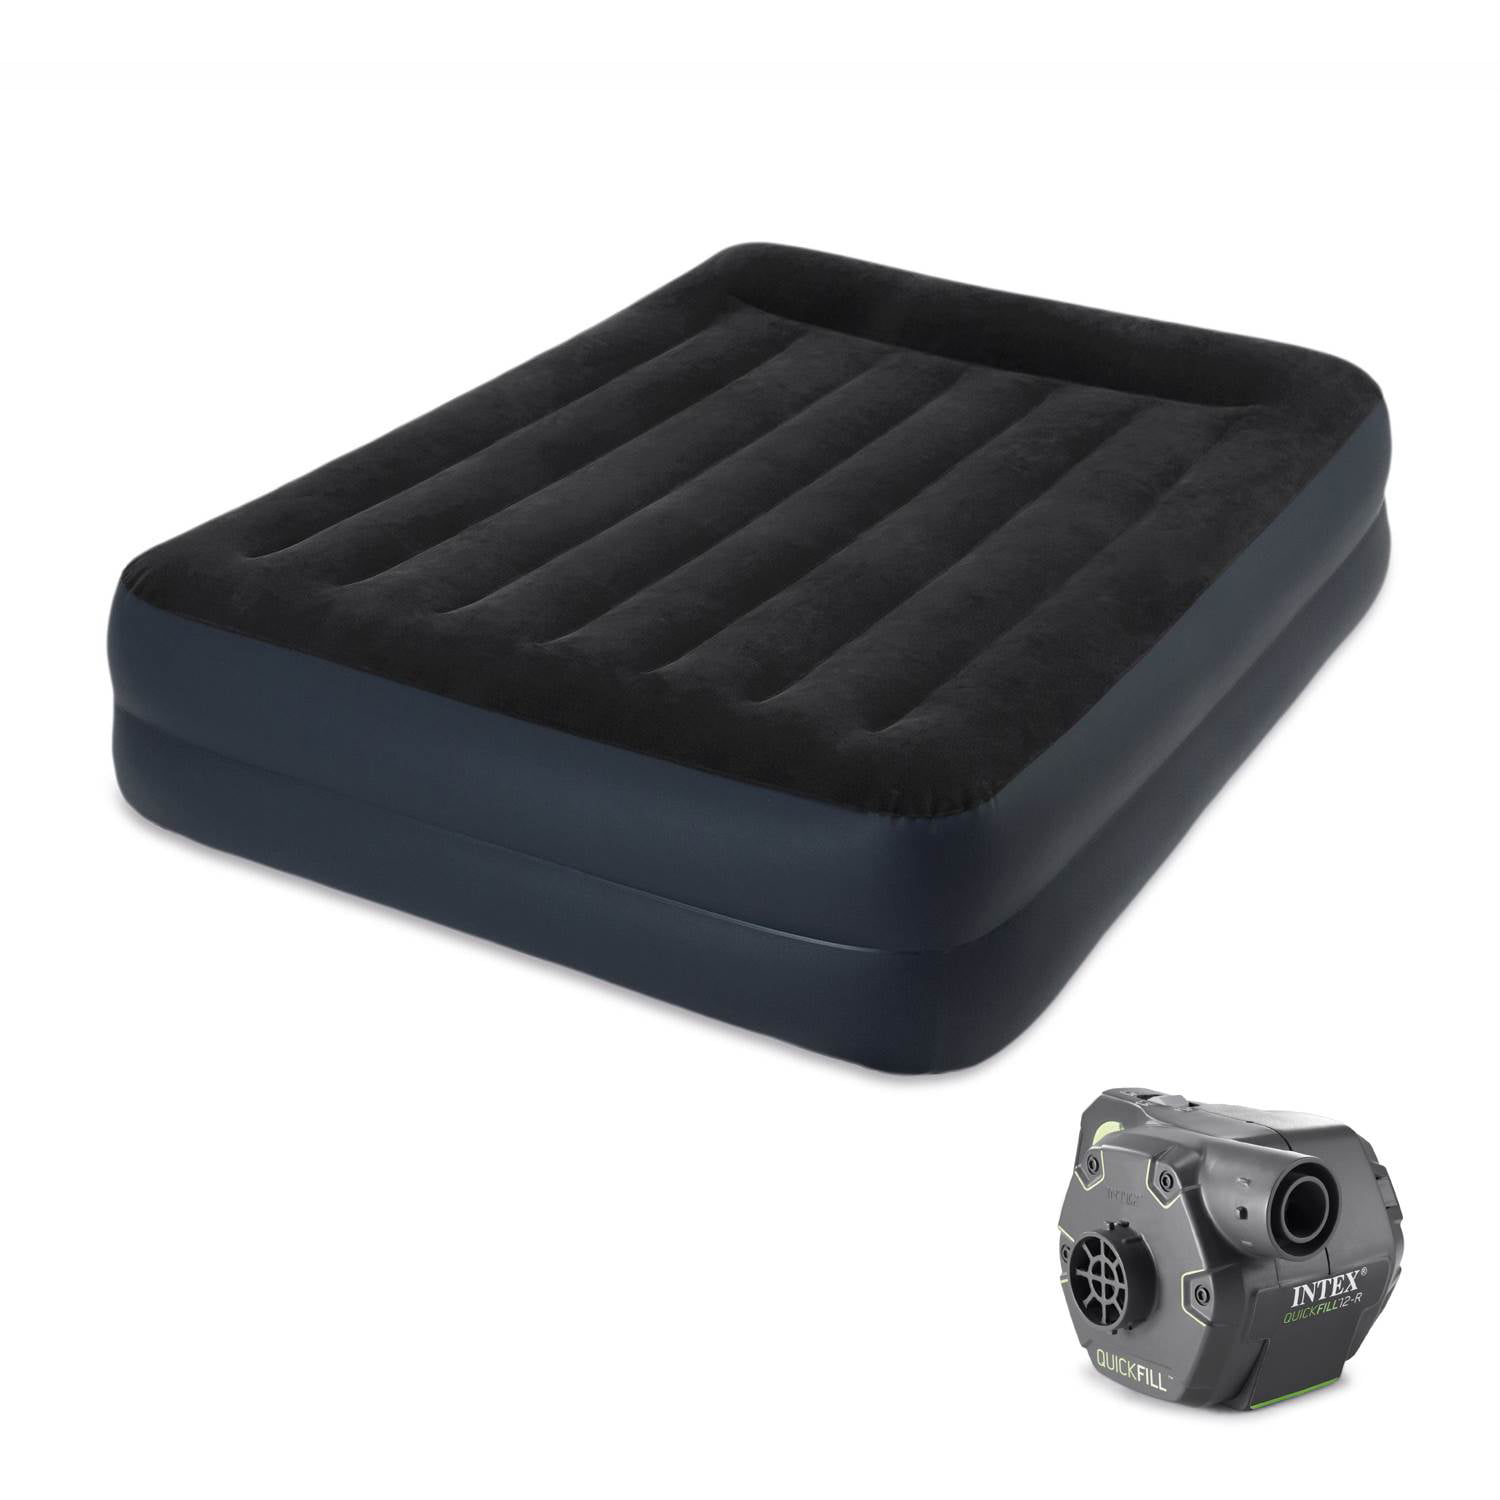 Intex 16.5 inch Queen Deluxe Pillow Rest Raised Airbed with Internal Pump Gray for sale online 